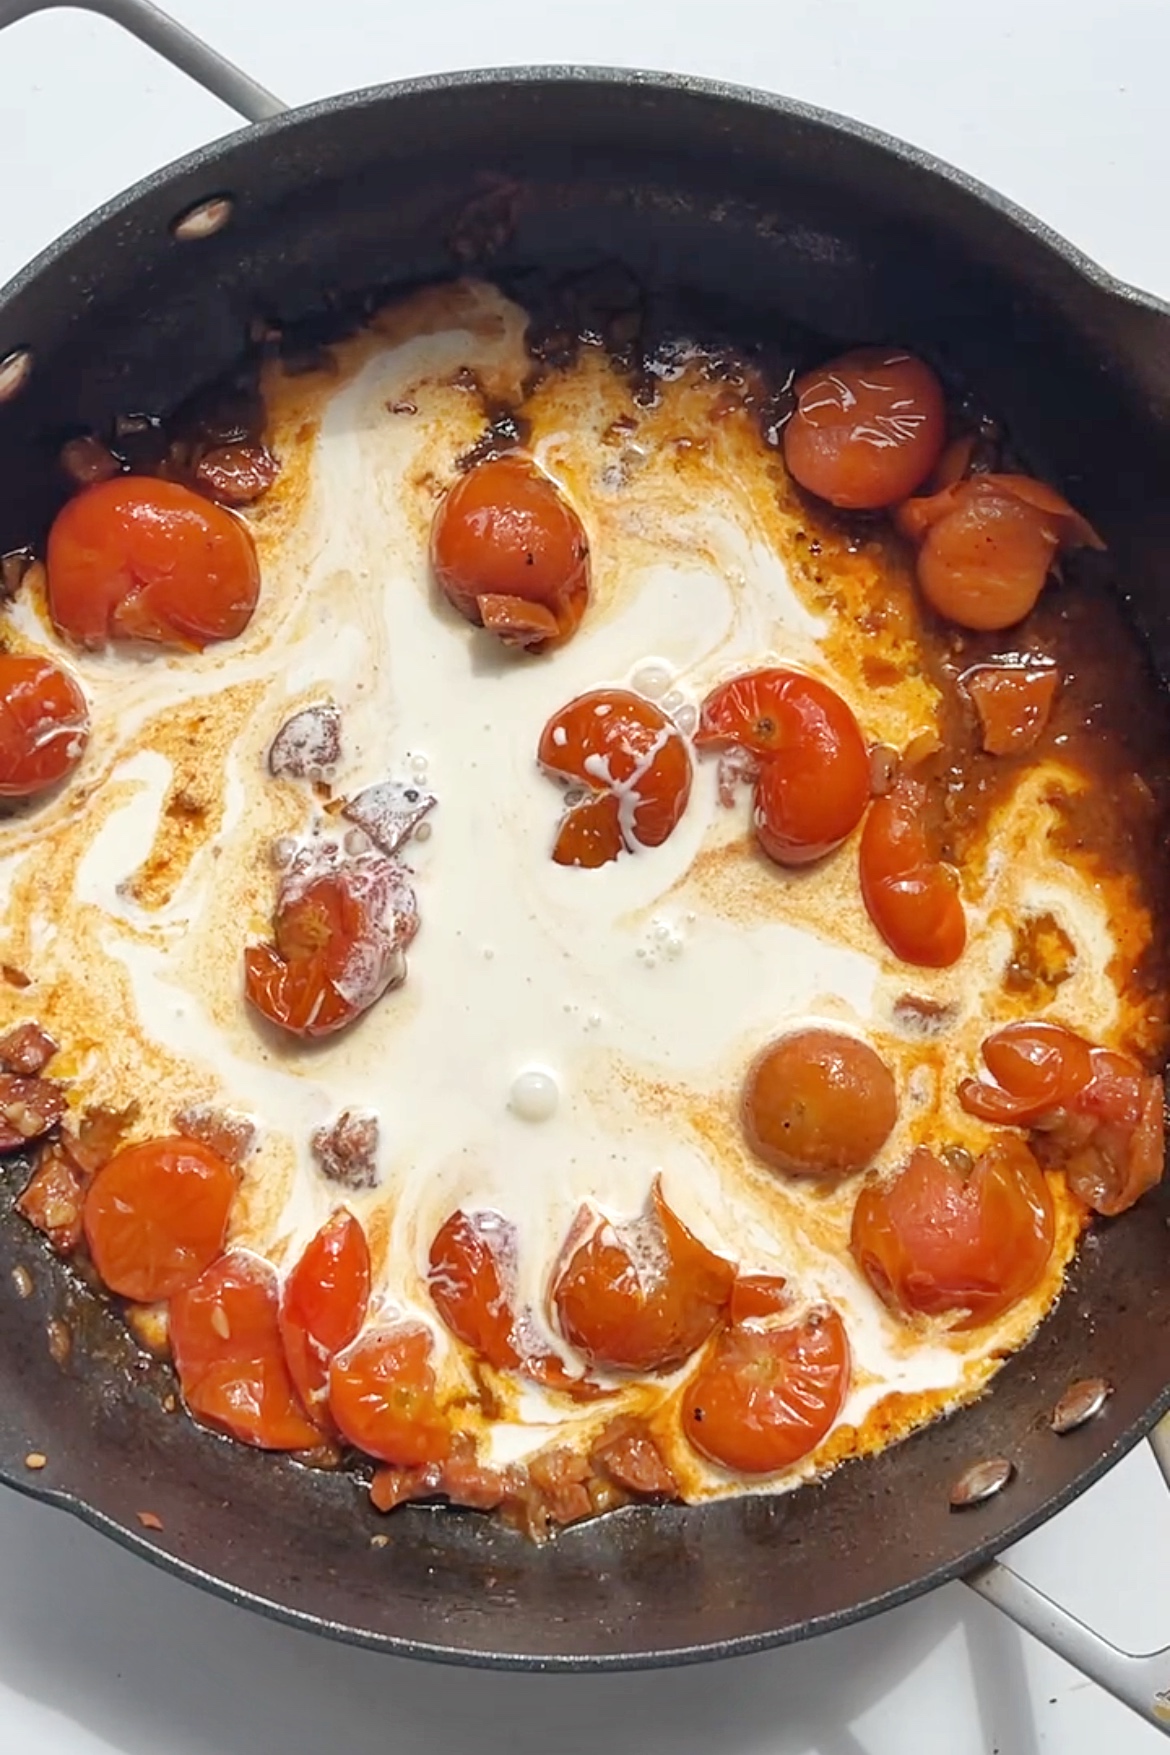 Making tomato and single cream sauce in black frying pan.